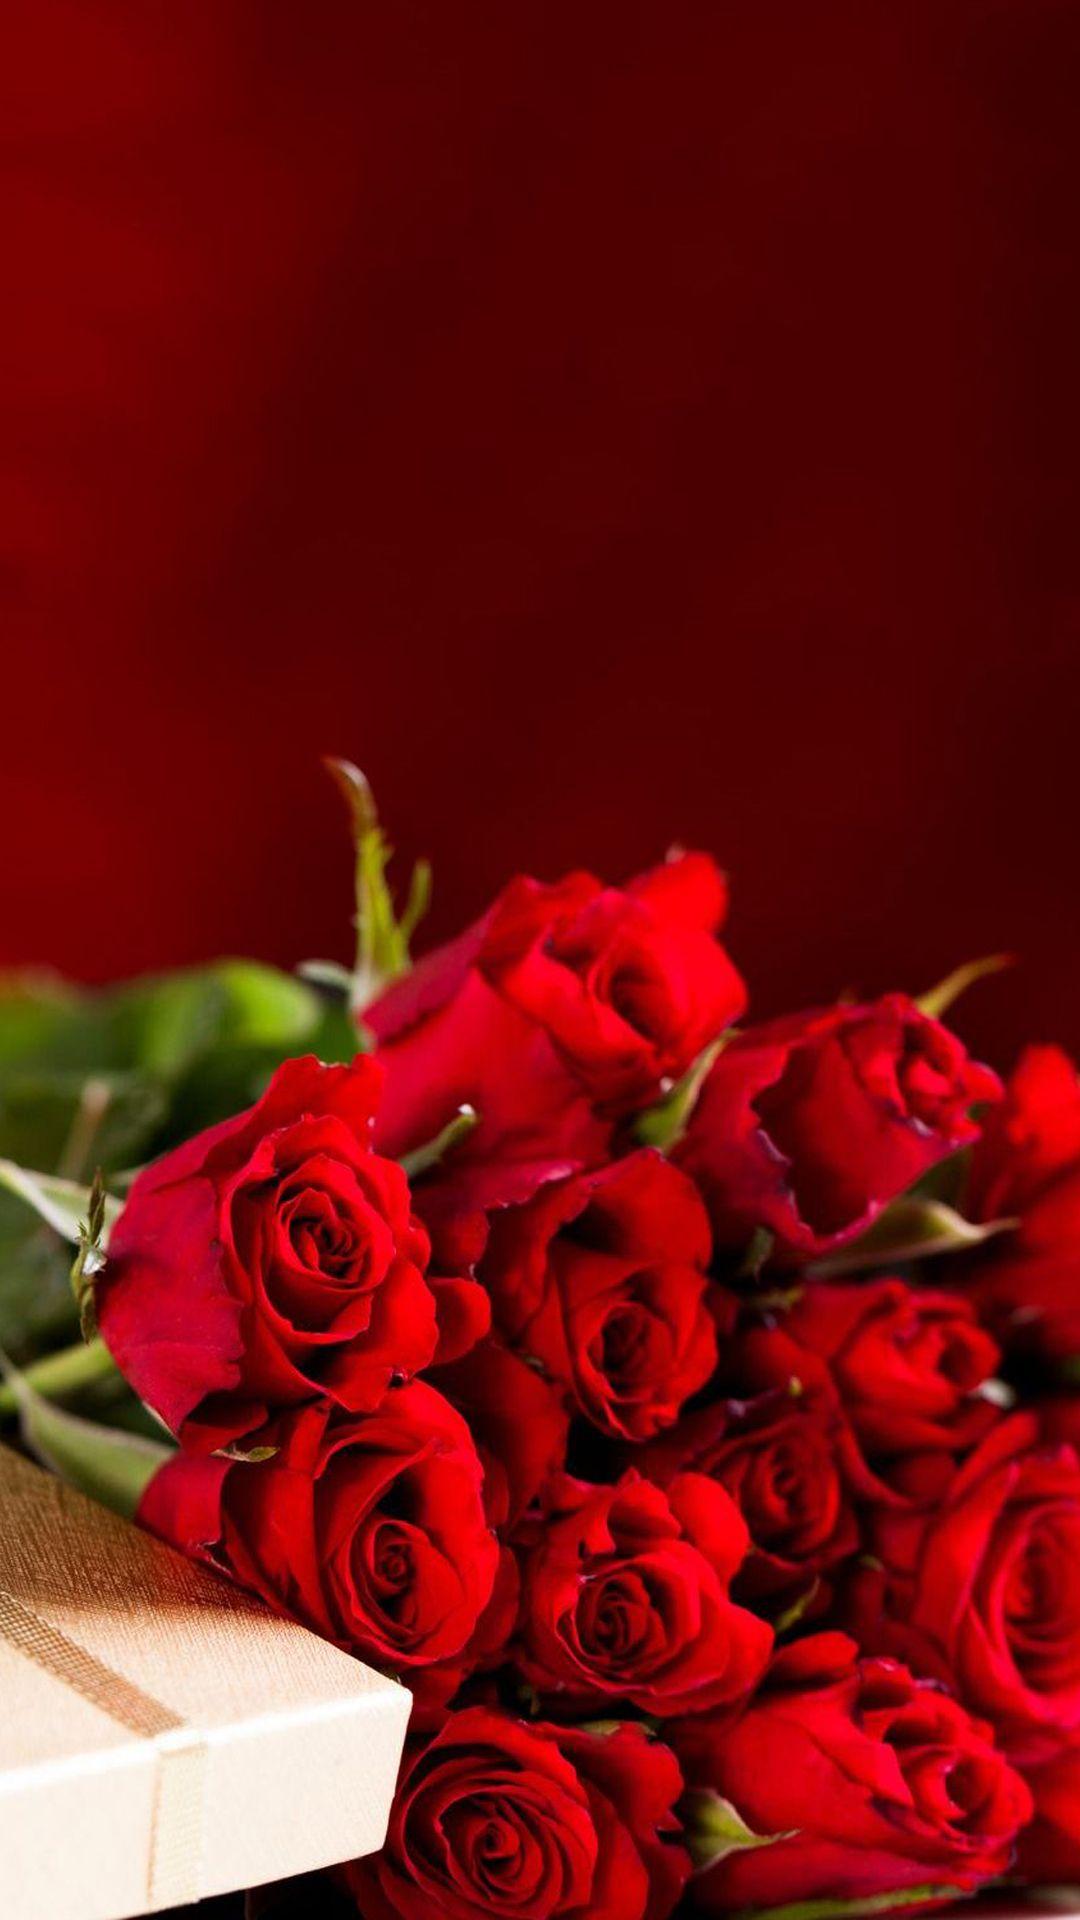 Red Roses Bouquet Valentines Day Gift Android Wallpaper free download